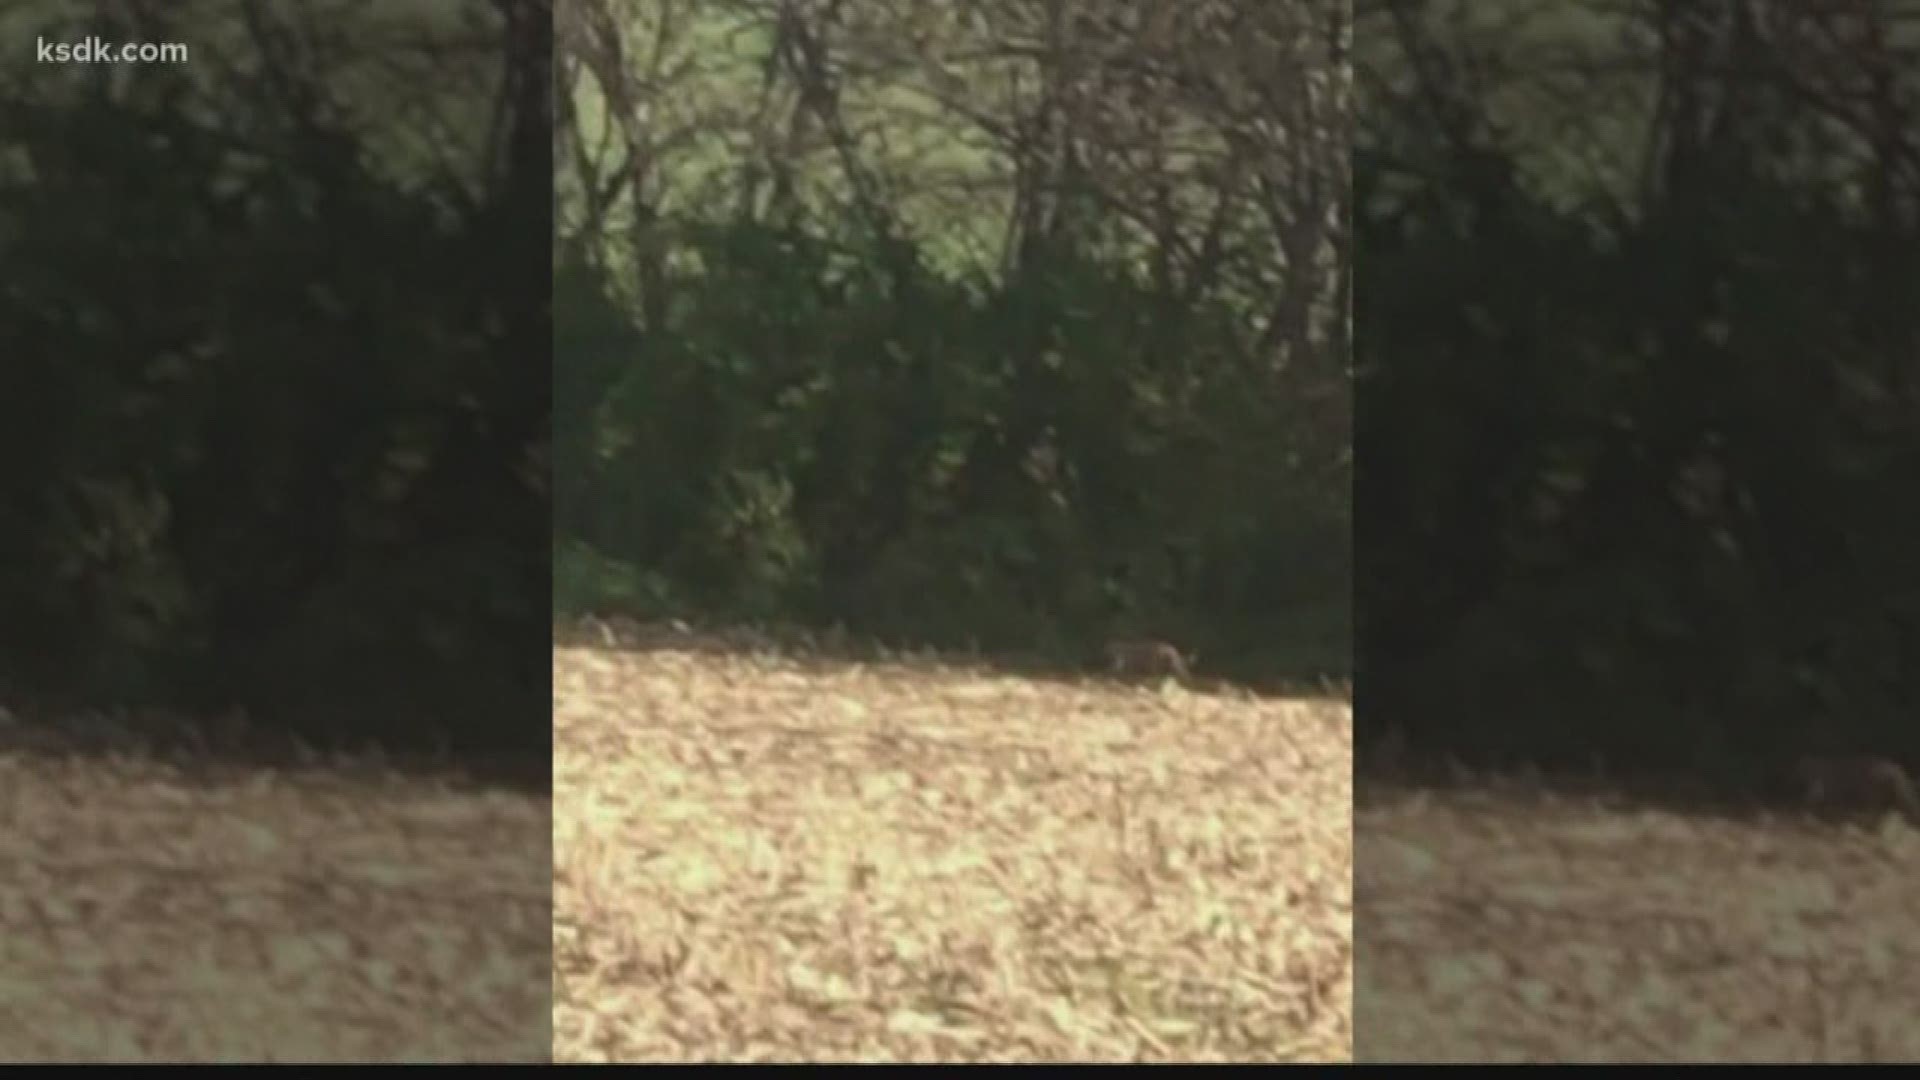 Several people may have seen a mountain lion last week in the small Illinois town of Hecker, and many of them are a little concerned.